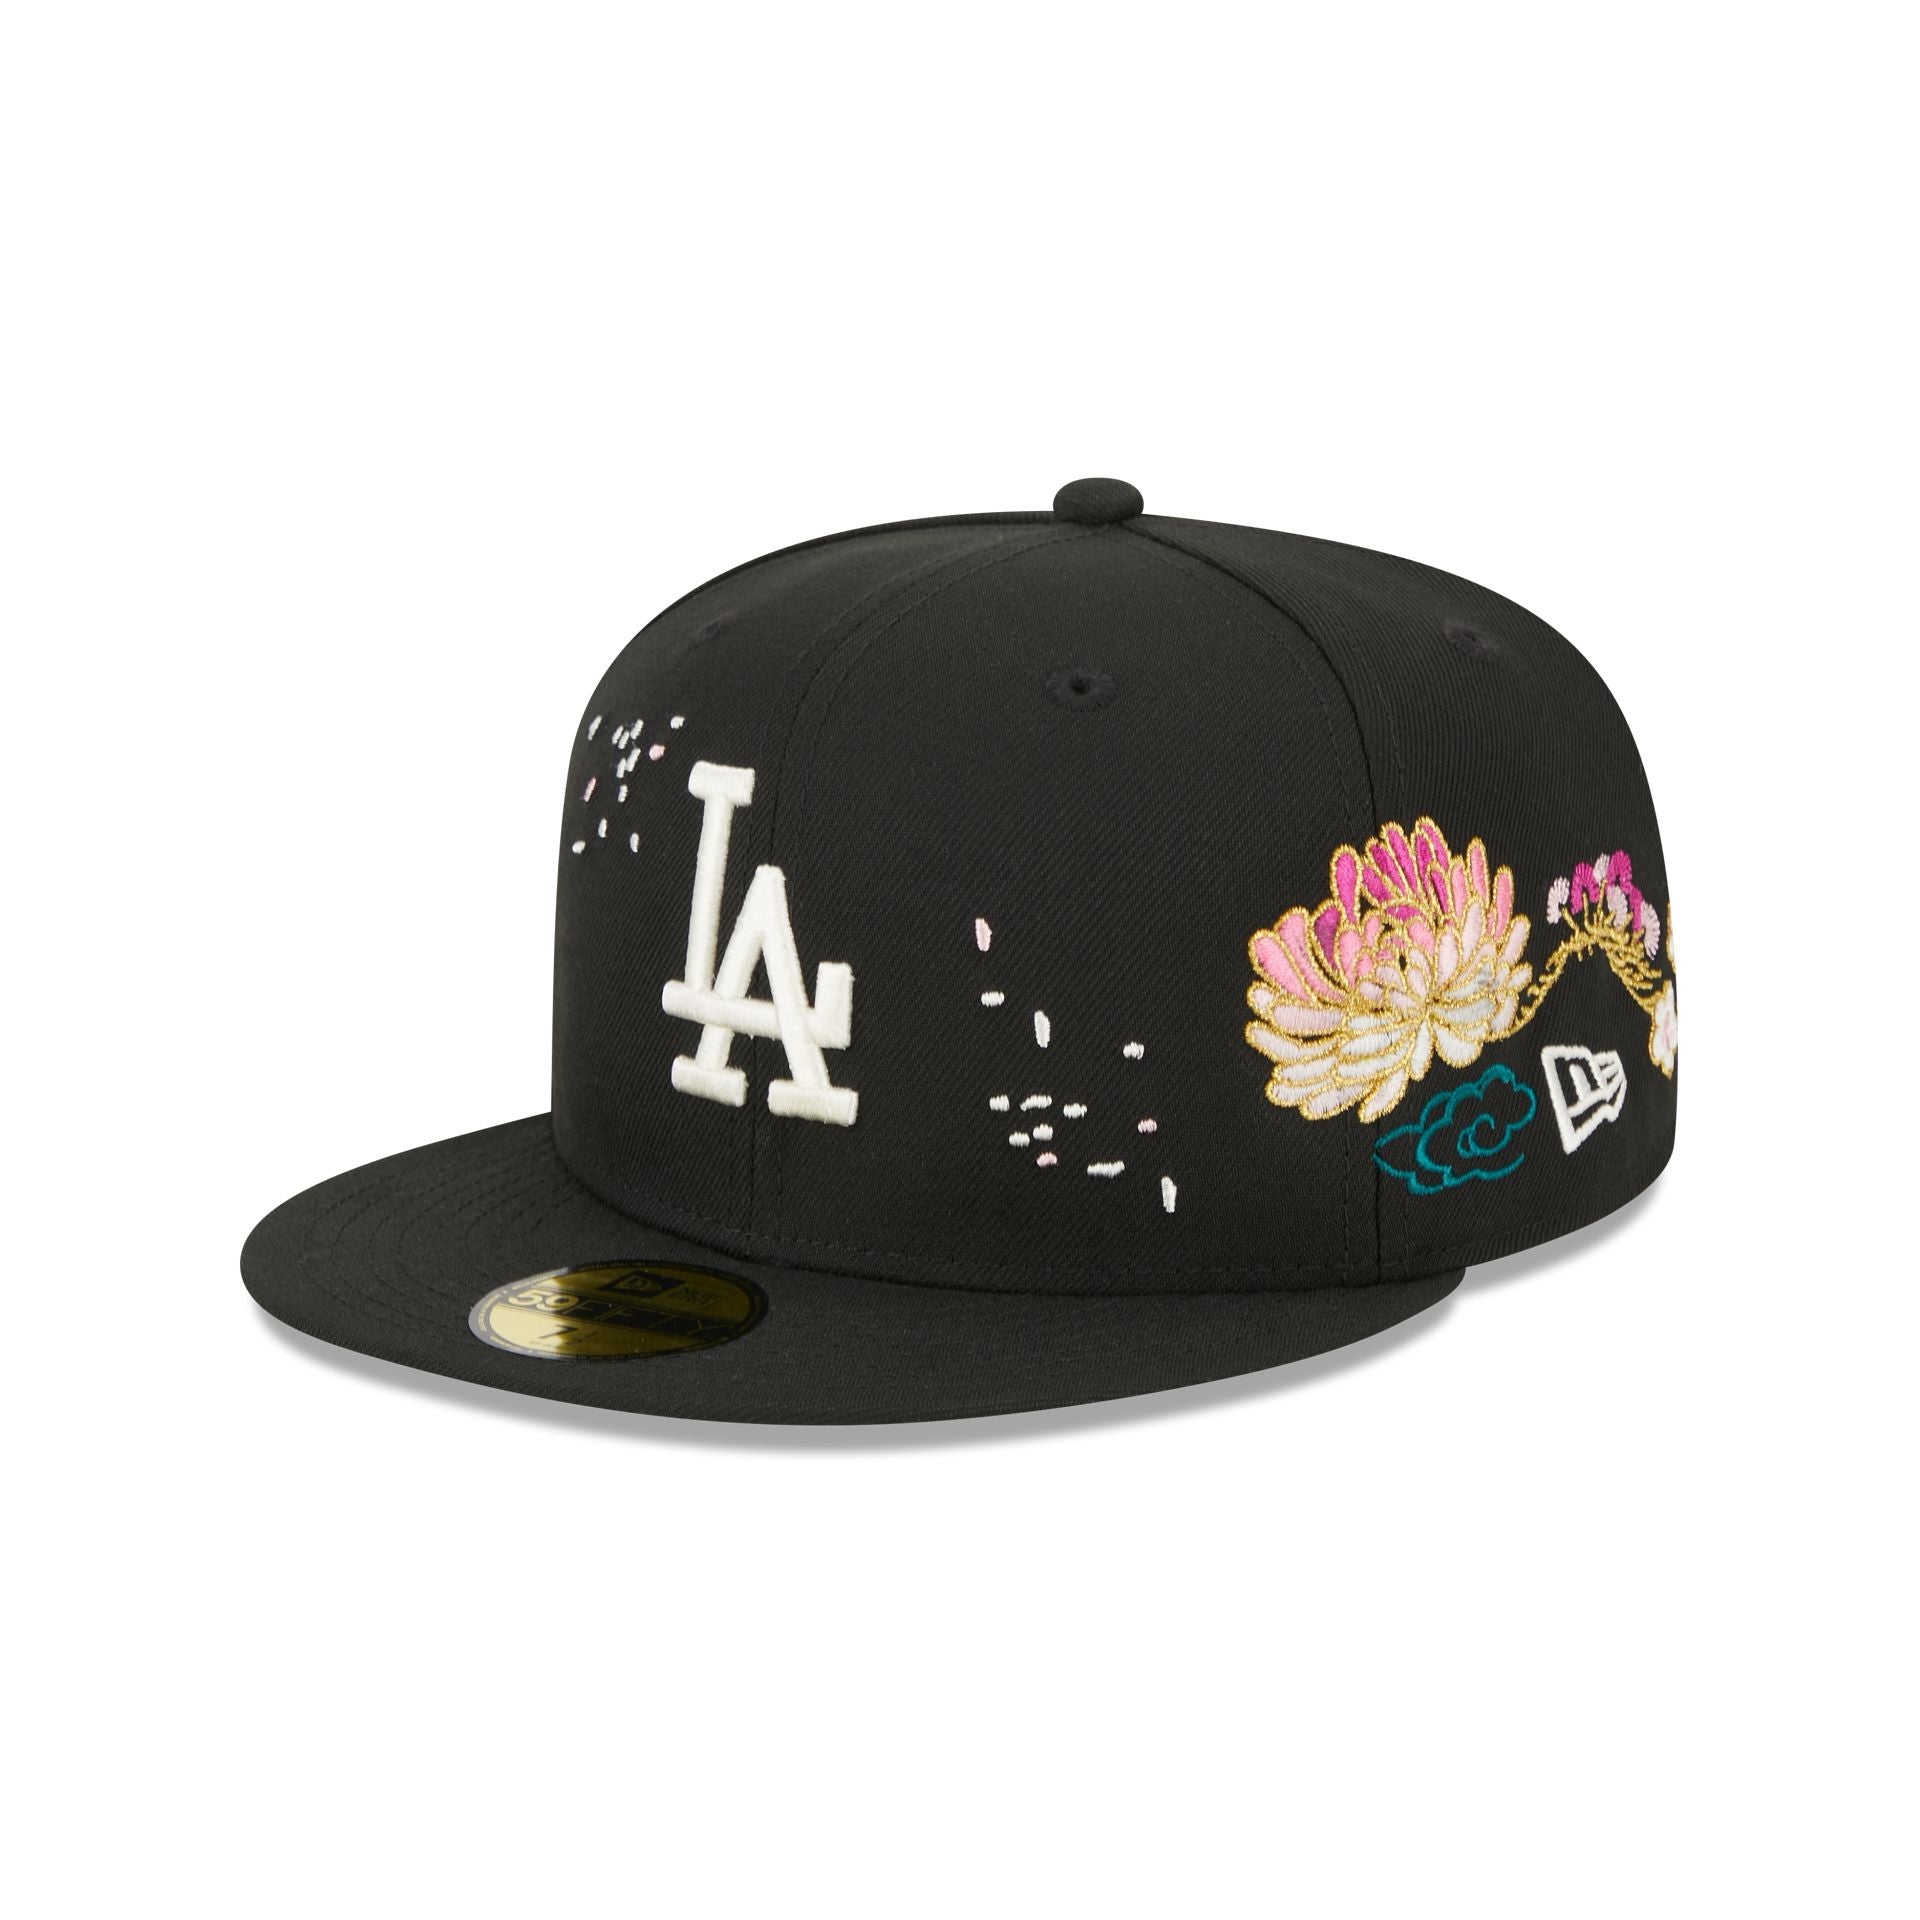 Los Angeles Dodgers Cherry Blossom 59FIFTY Fitted Hat – New Era Cap